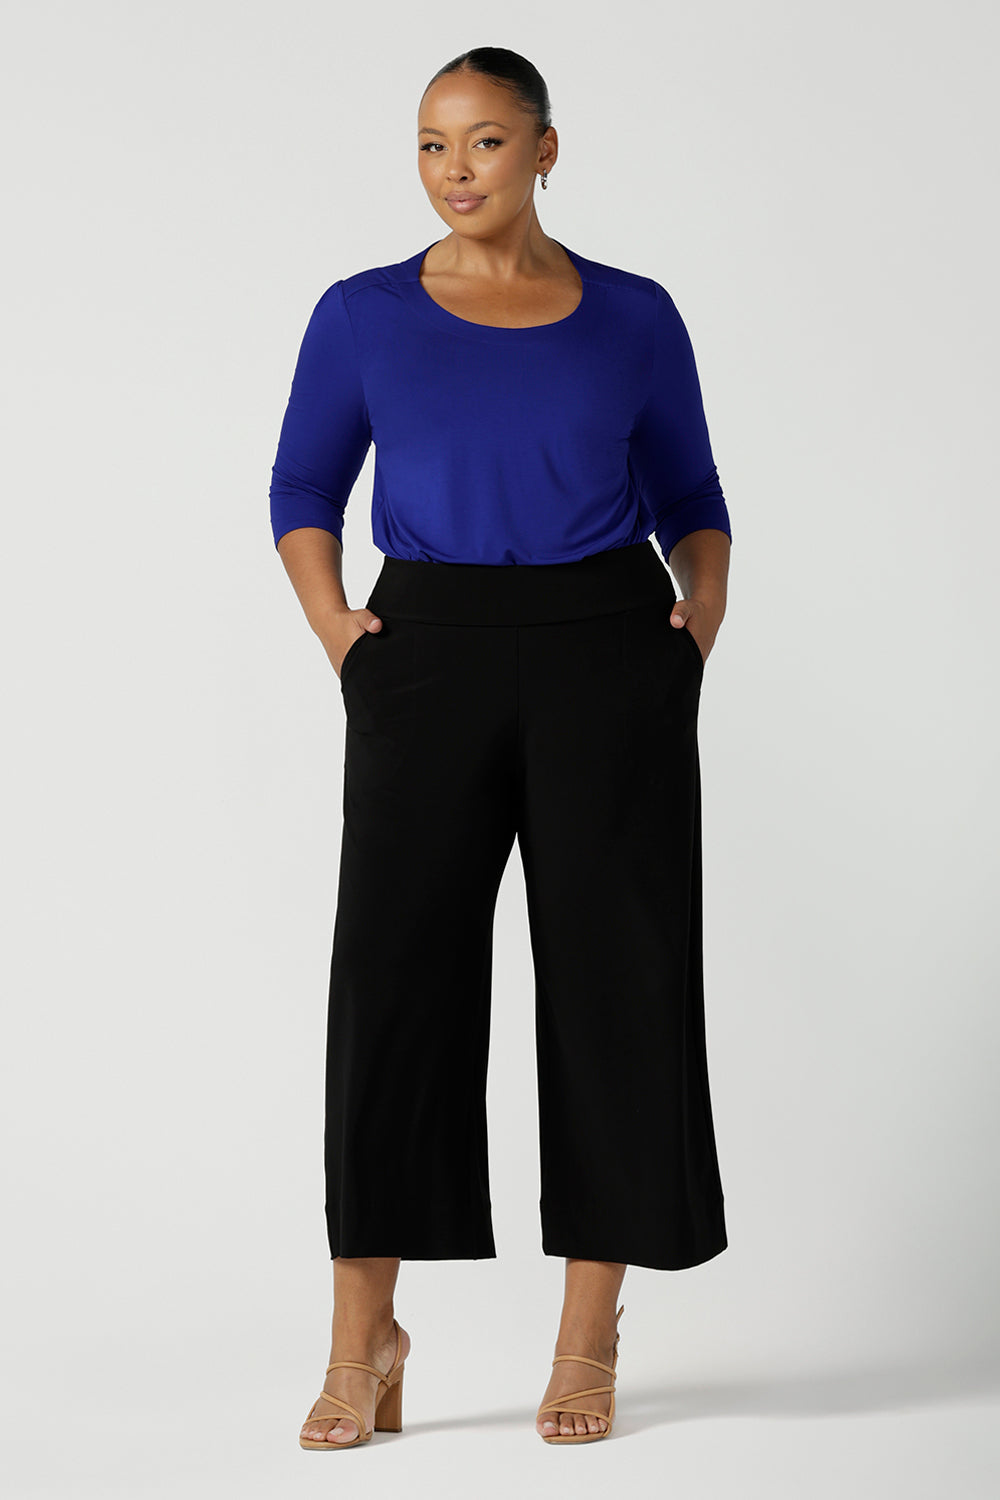 Comfortable, wide leg black culotte pants worn with a 3/4 sleeve, round neck top in cobalt blue bamboo jersey are worn by a plus size, size 18 woman - shop online at Australian women's clothing brand, Leina & Fleur.